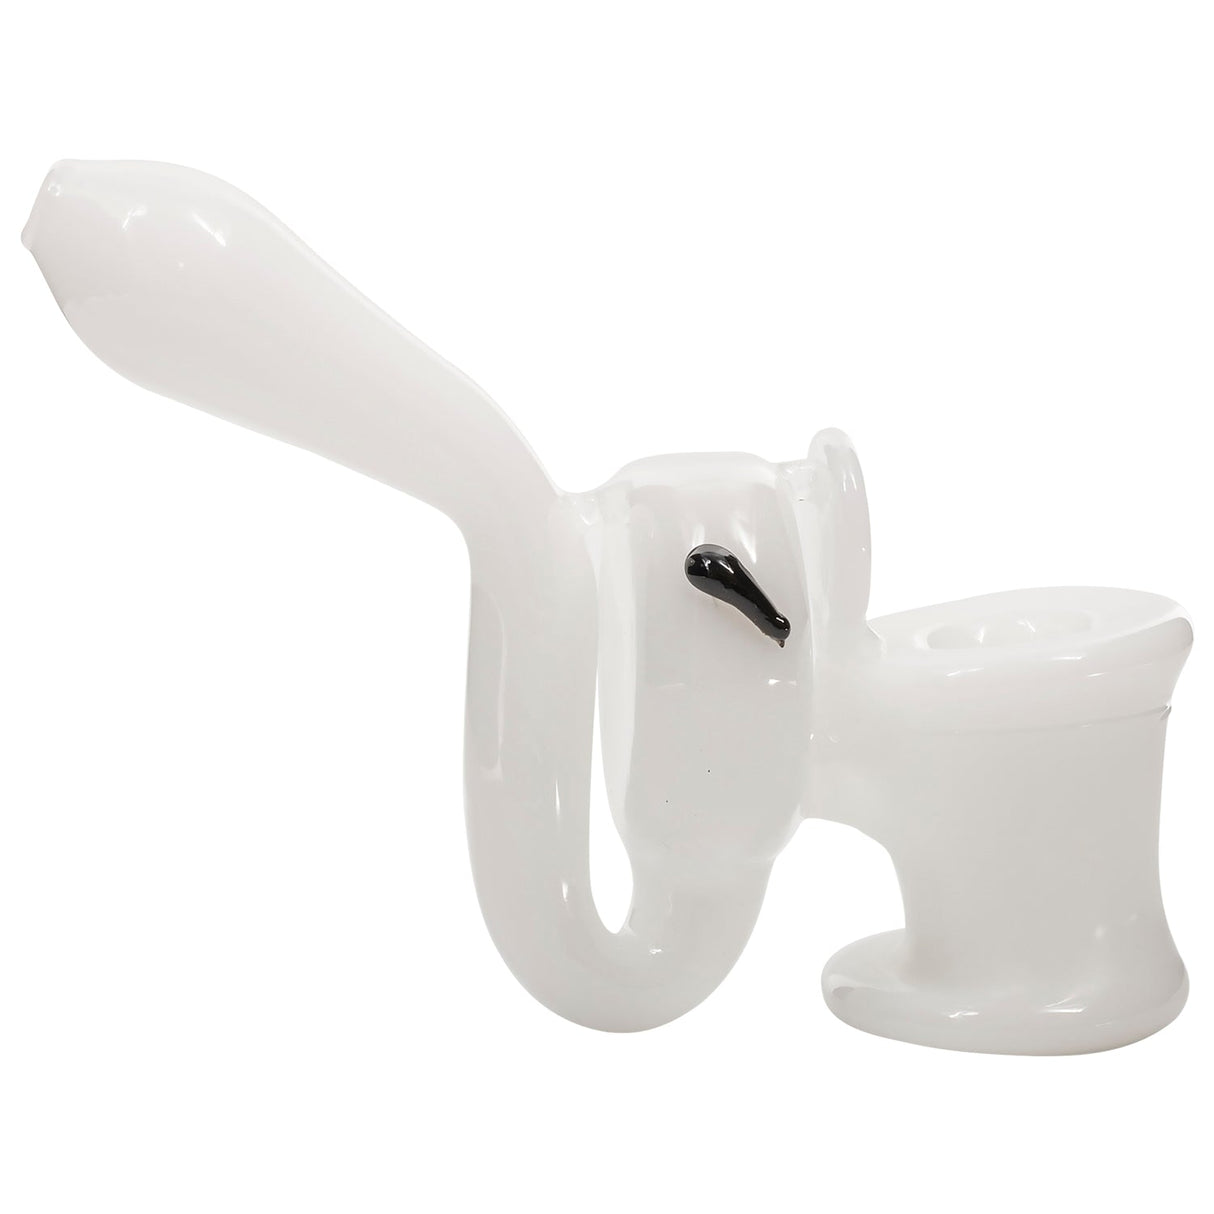 LA Pipes - The Good Ish Toilet Bowl Glass Pipe, Sherlock Design, Side View